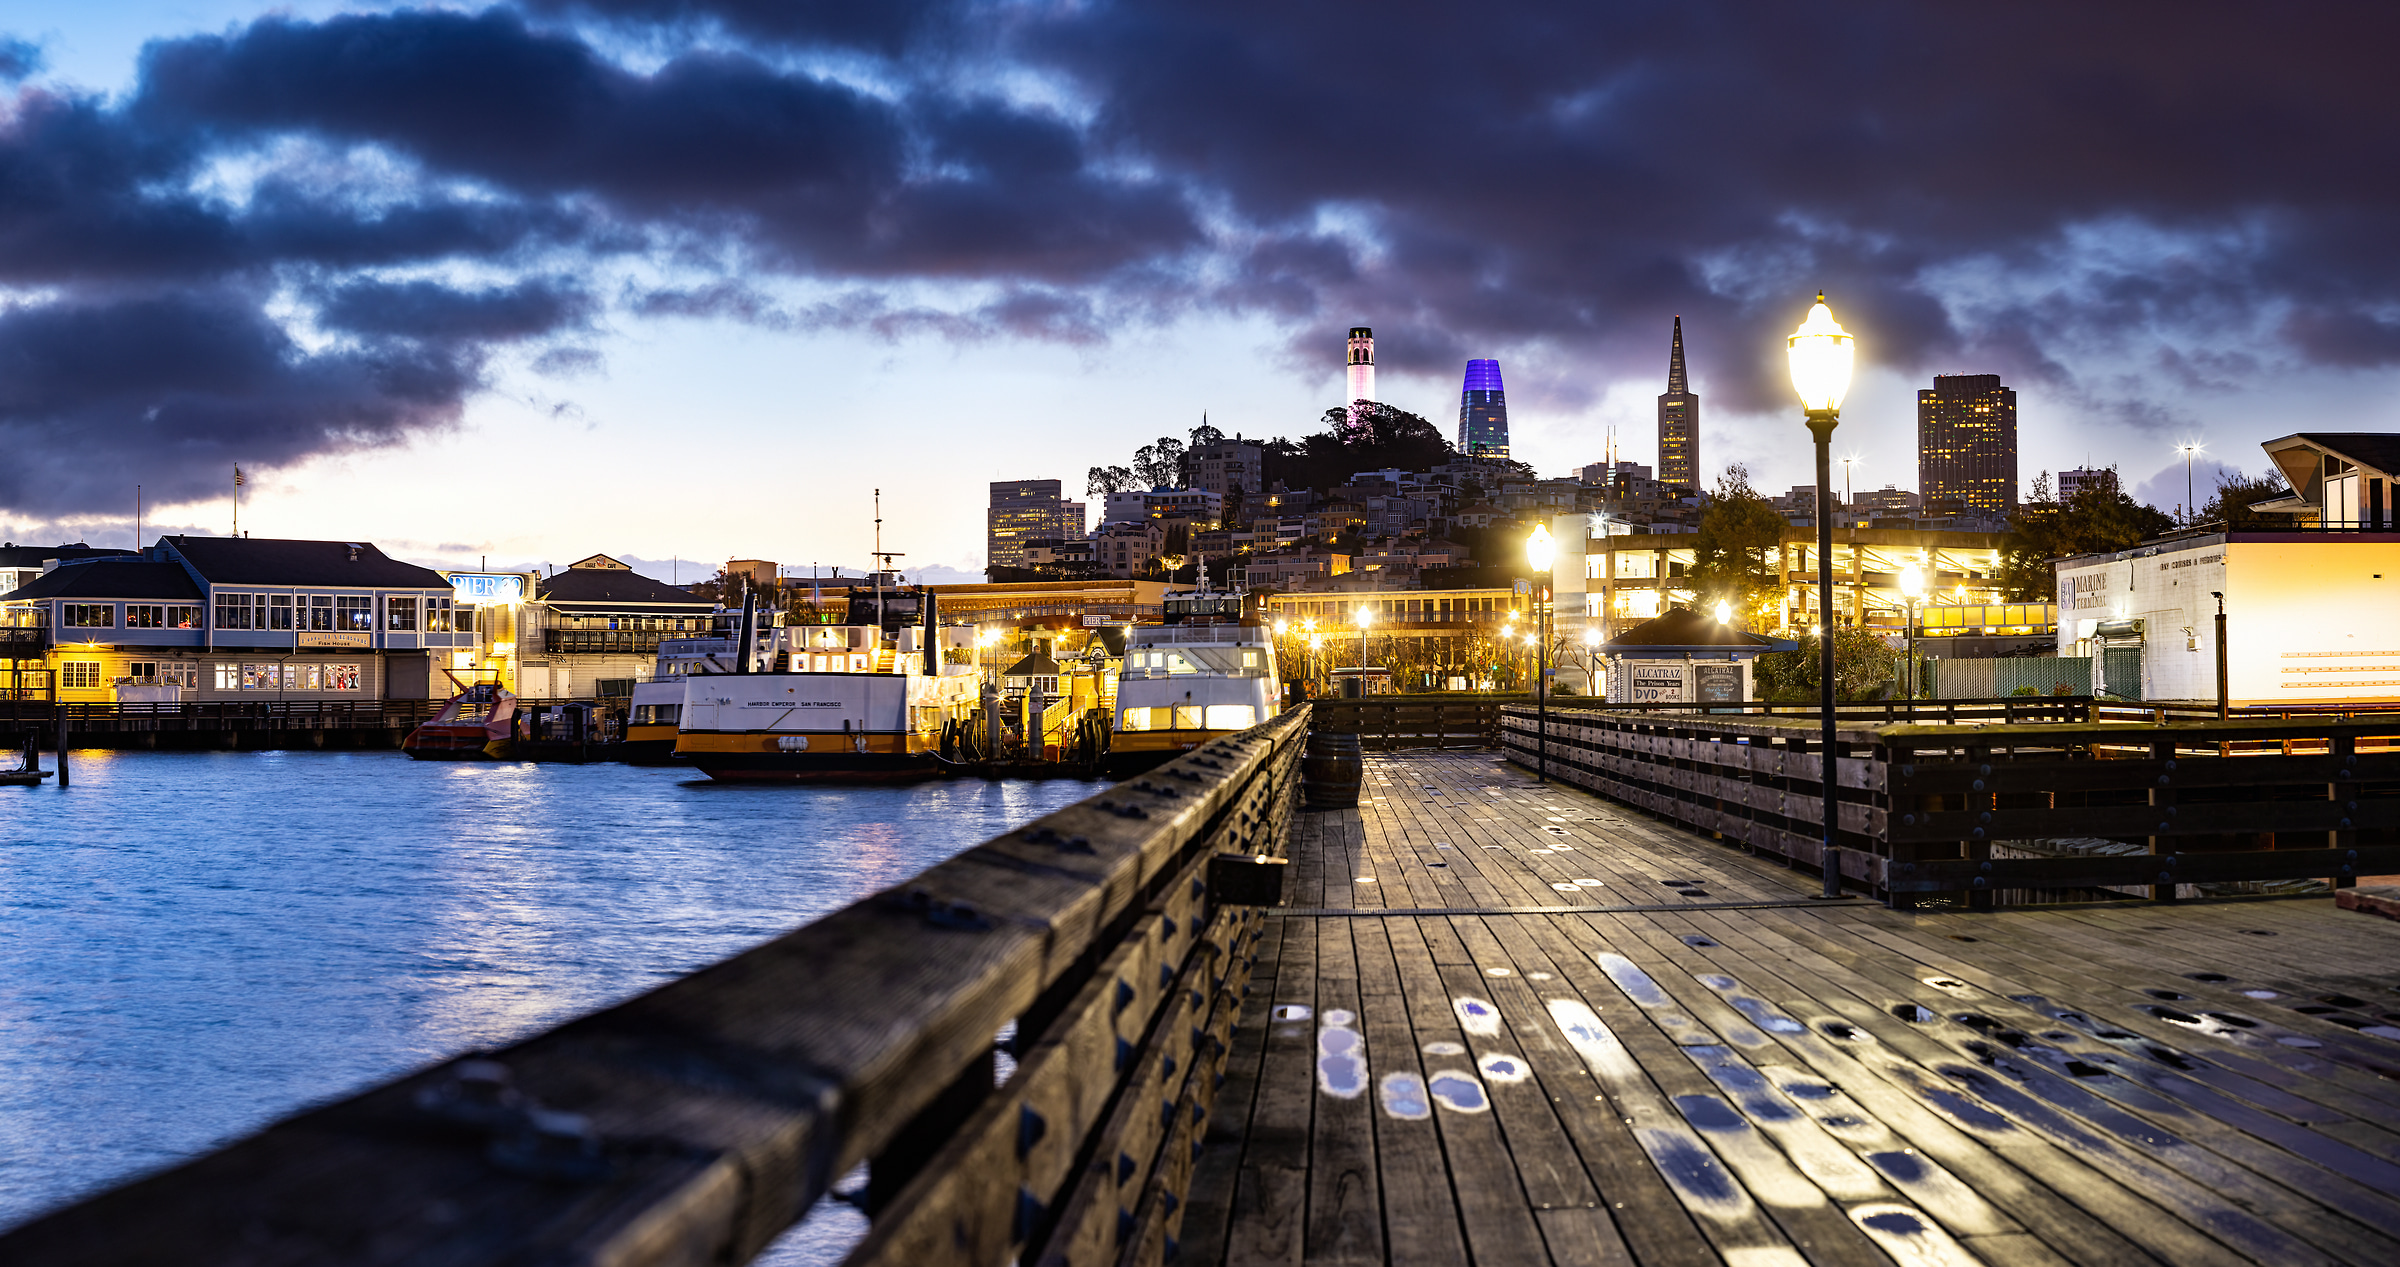 225 megapixels! A very high resolution, large-format VAST photo print of a pier in San Francisco at sunrise; photograph created by Nicholas Gonzales in Pier 41, San Francisco, California.